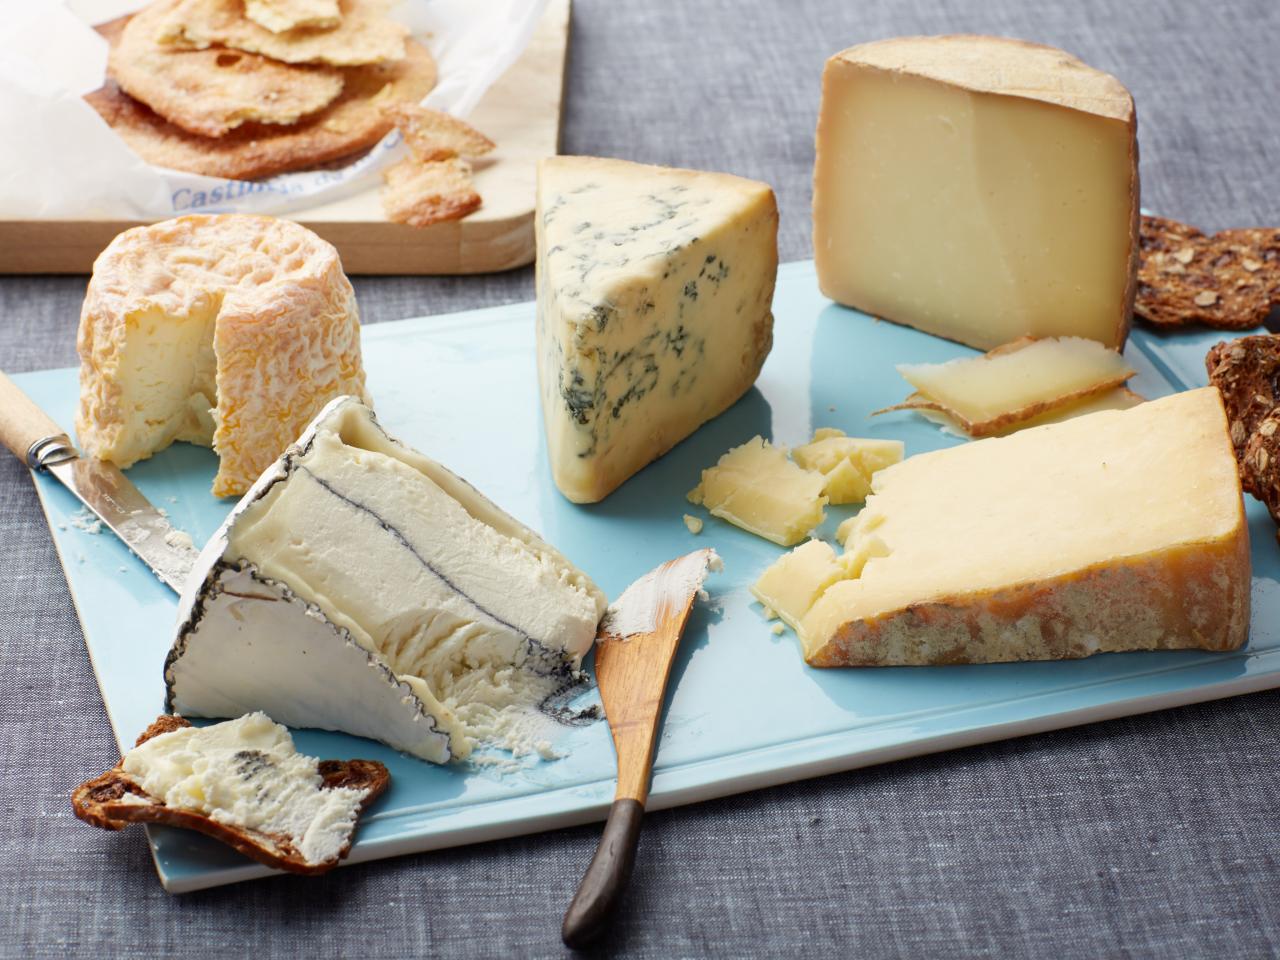 Know your Cheese: A complete guide to types of Cheese – Food & Recipes